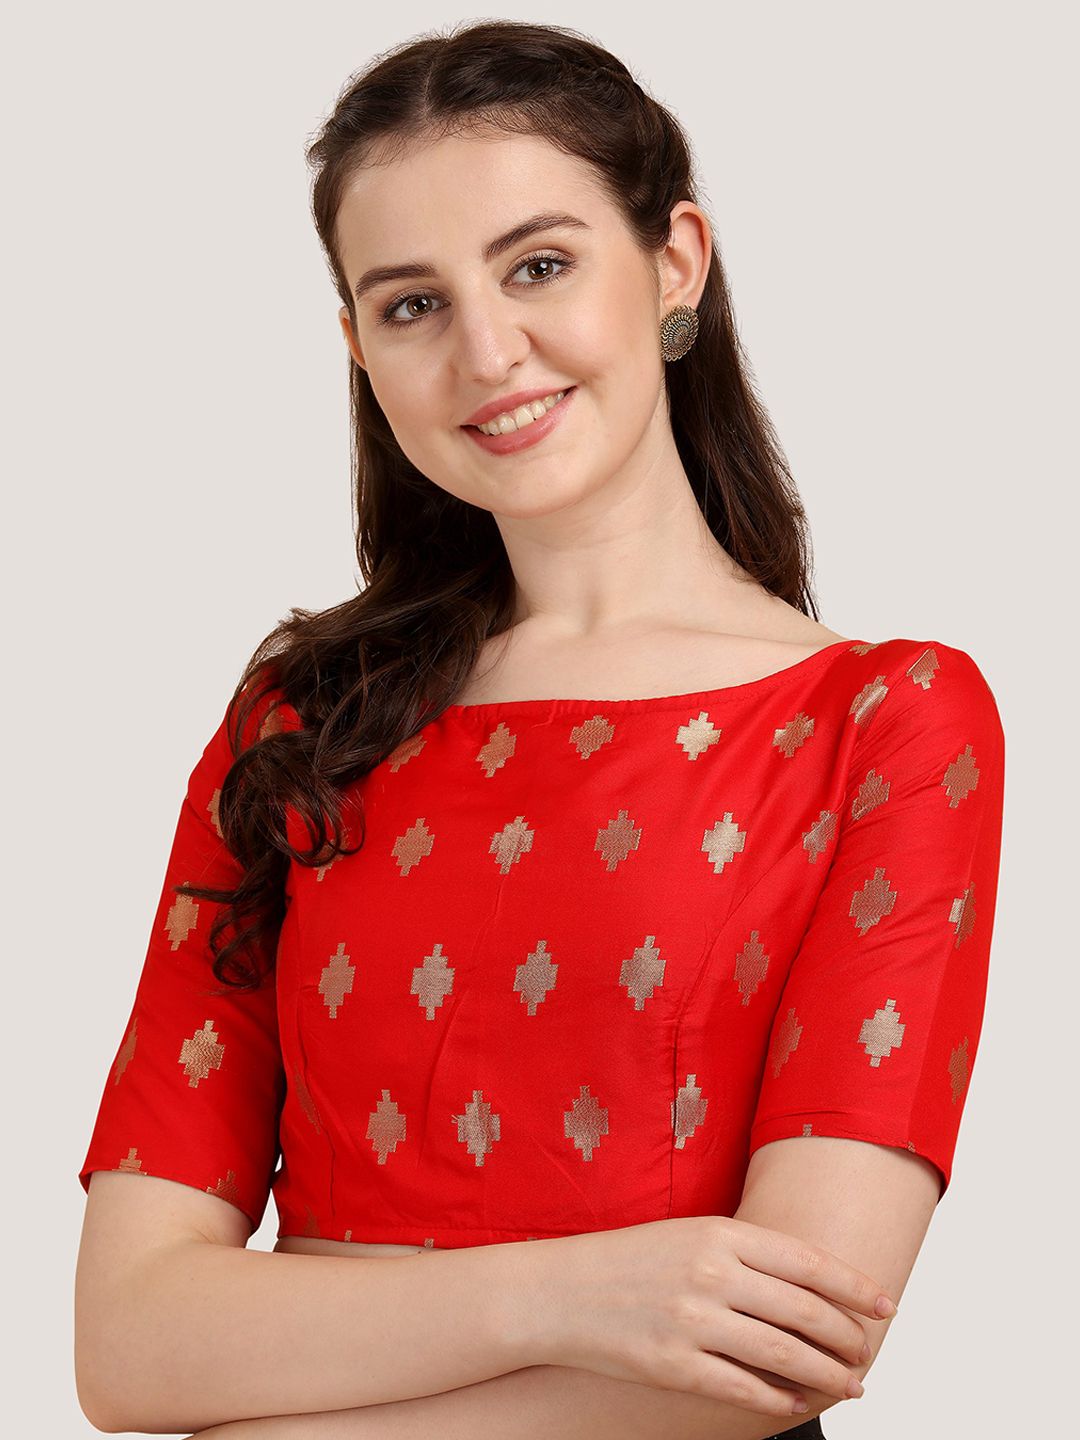 Oomph! Ethnic Motifs Woven Design Saree Blouse Price in India